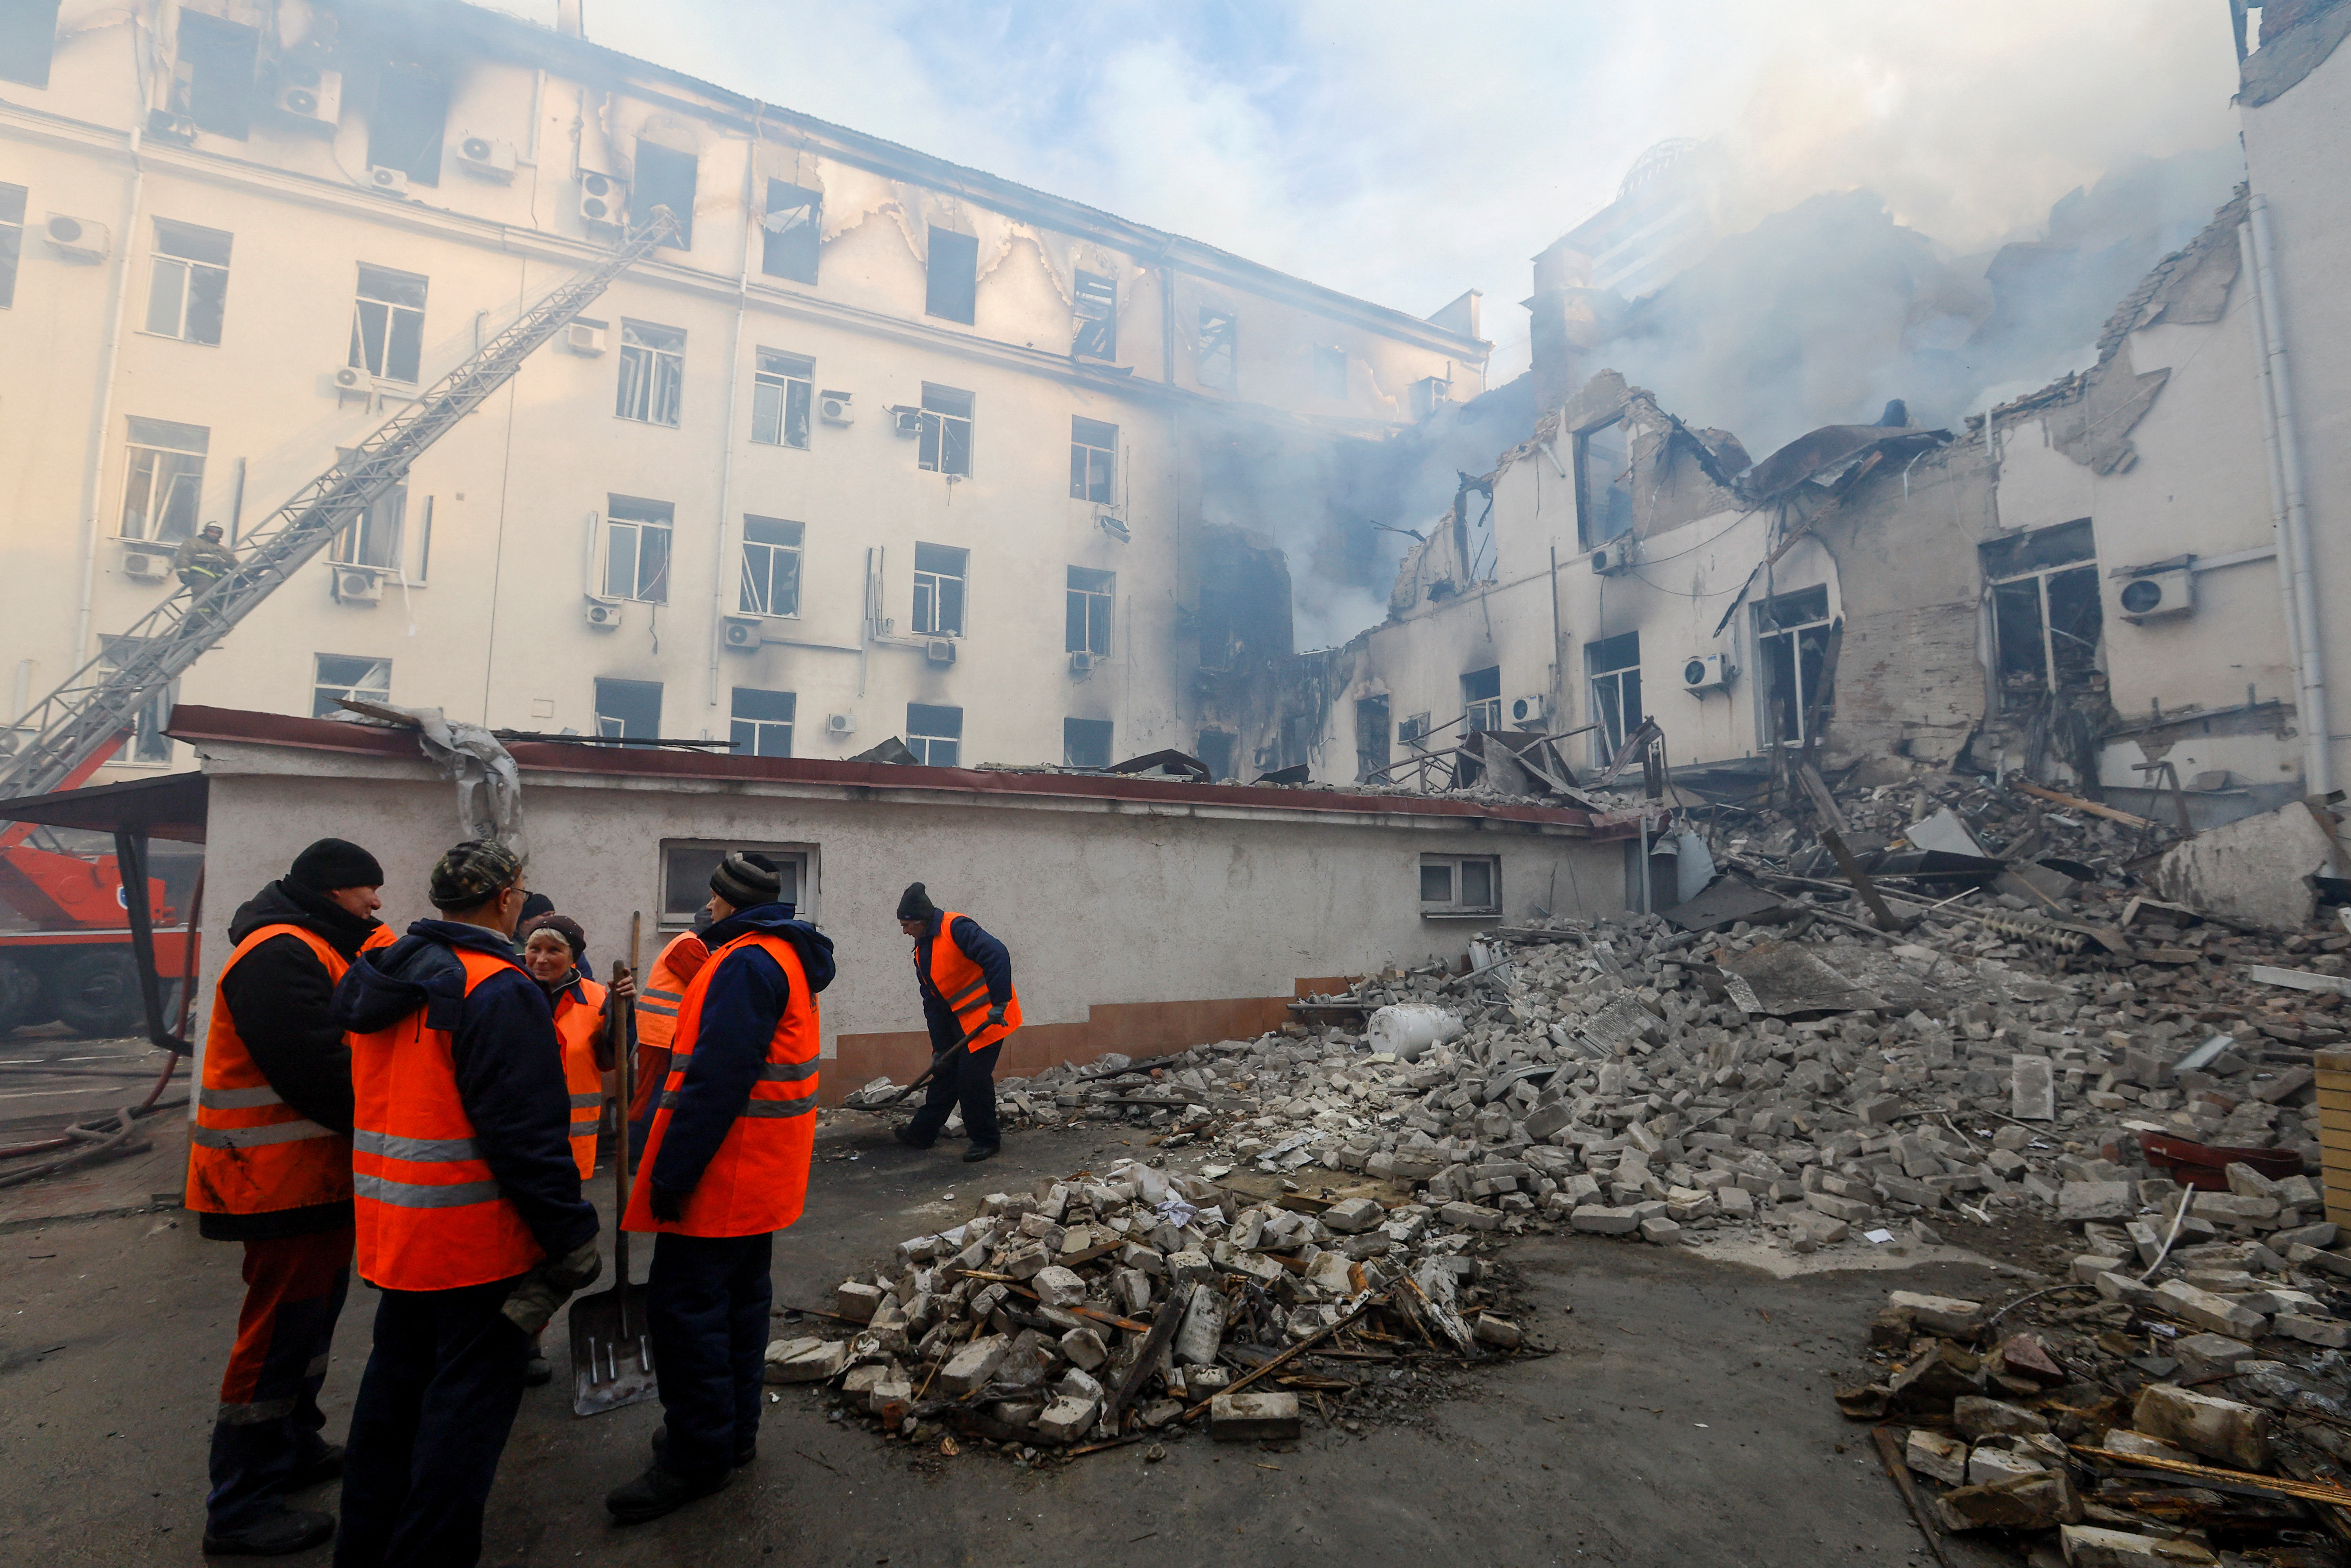 Workers remove debris from a building damaged by debris in Donetsk. Alexander Ermochenko/Reuters